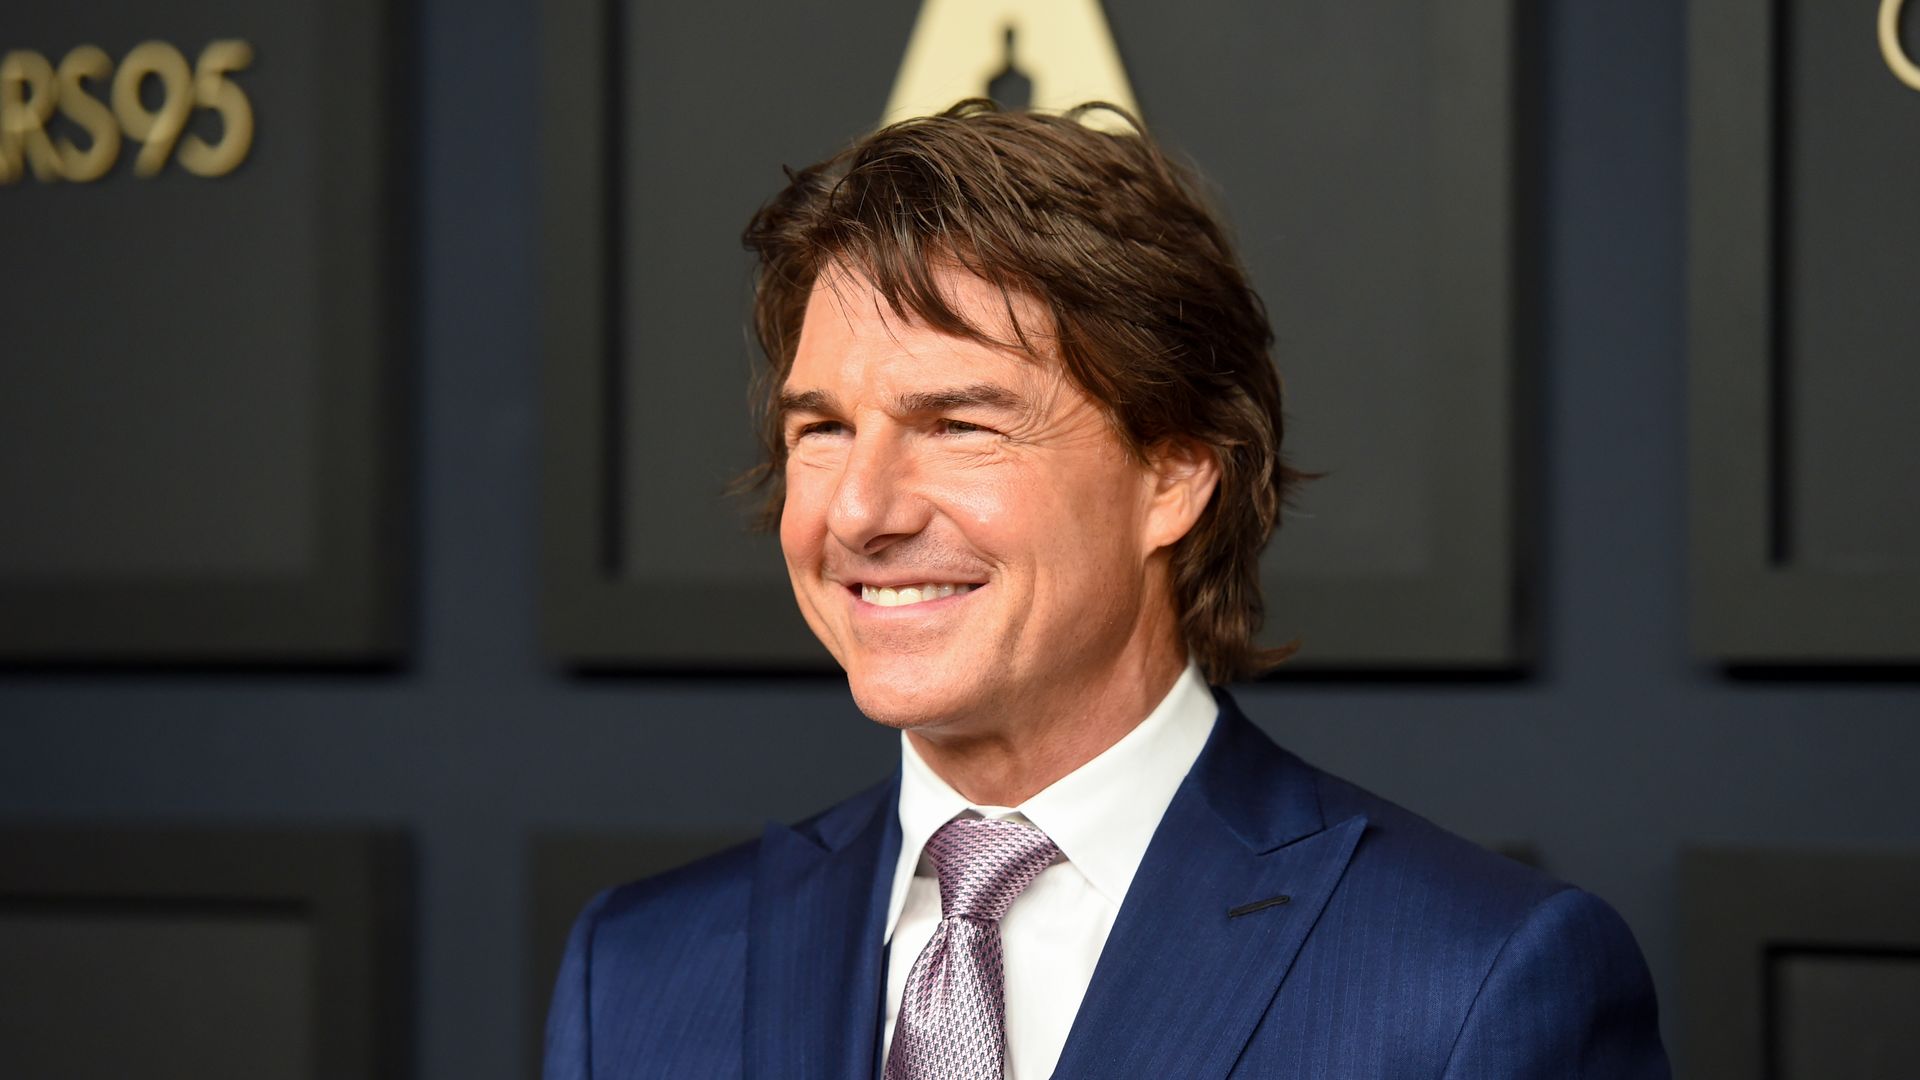 Tom Cruise's relationship history: from Nicole Kidman and Katie Holmes to recent split from Russian socialite